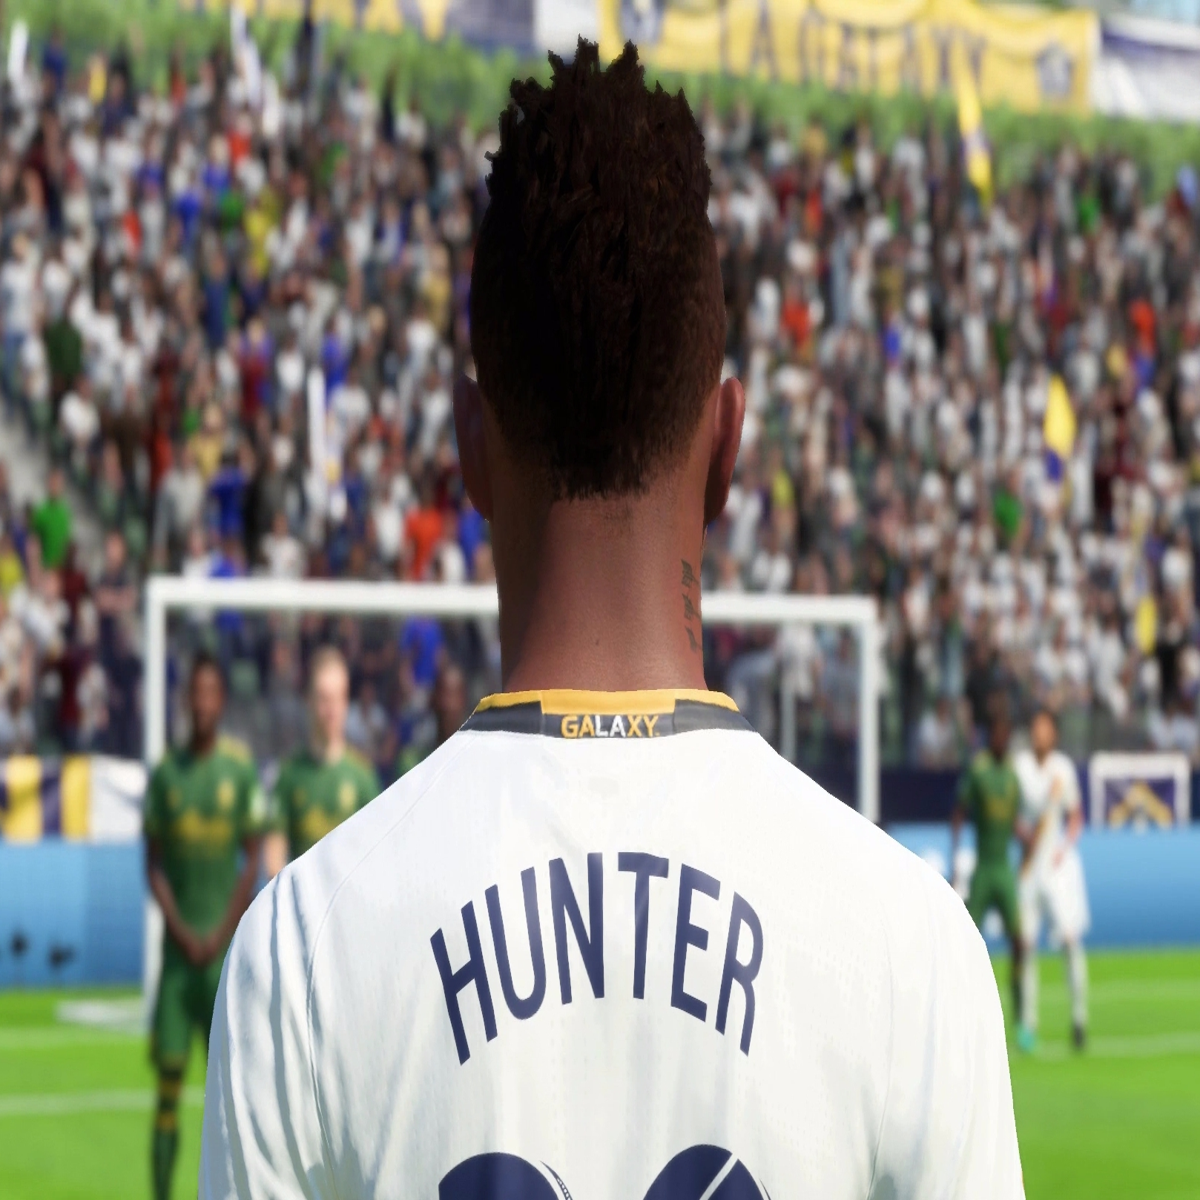 FIFA 18 PC - Electronic First